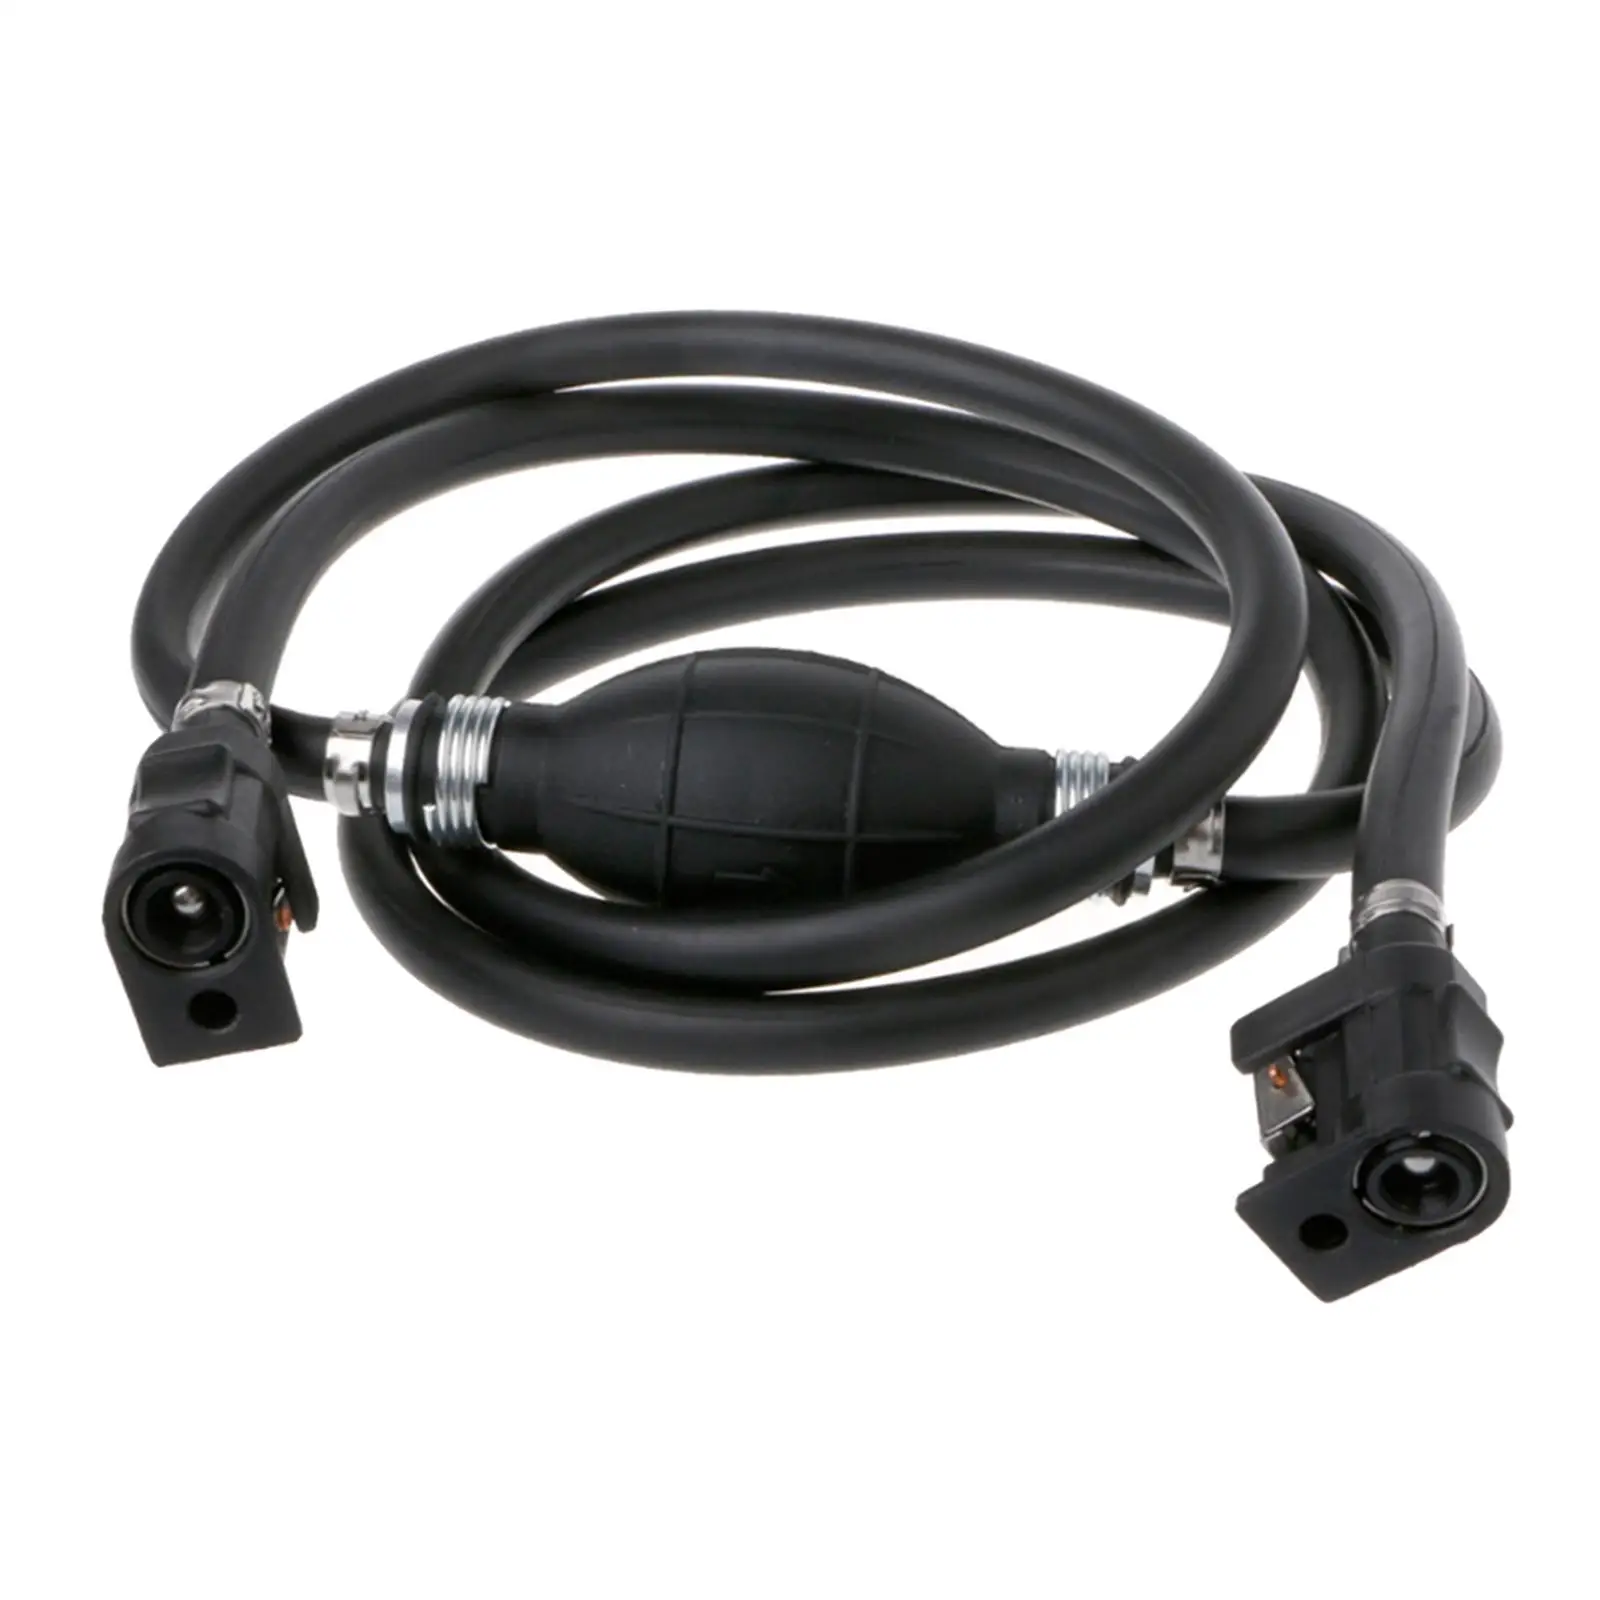 Boat Fuel Lines for (, , OMC, Universal) Engine Options Hose 9FT